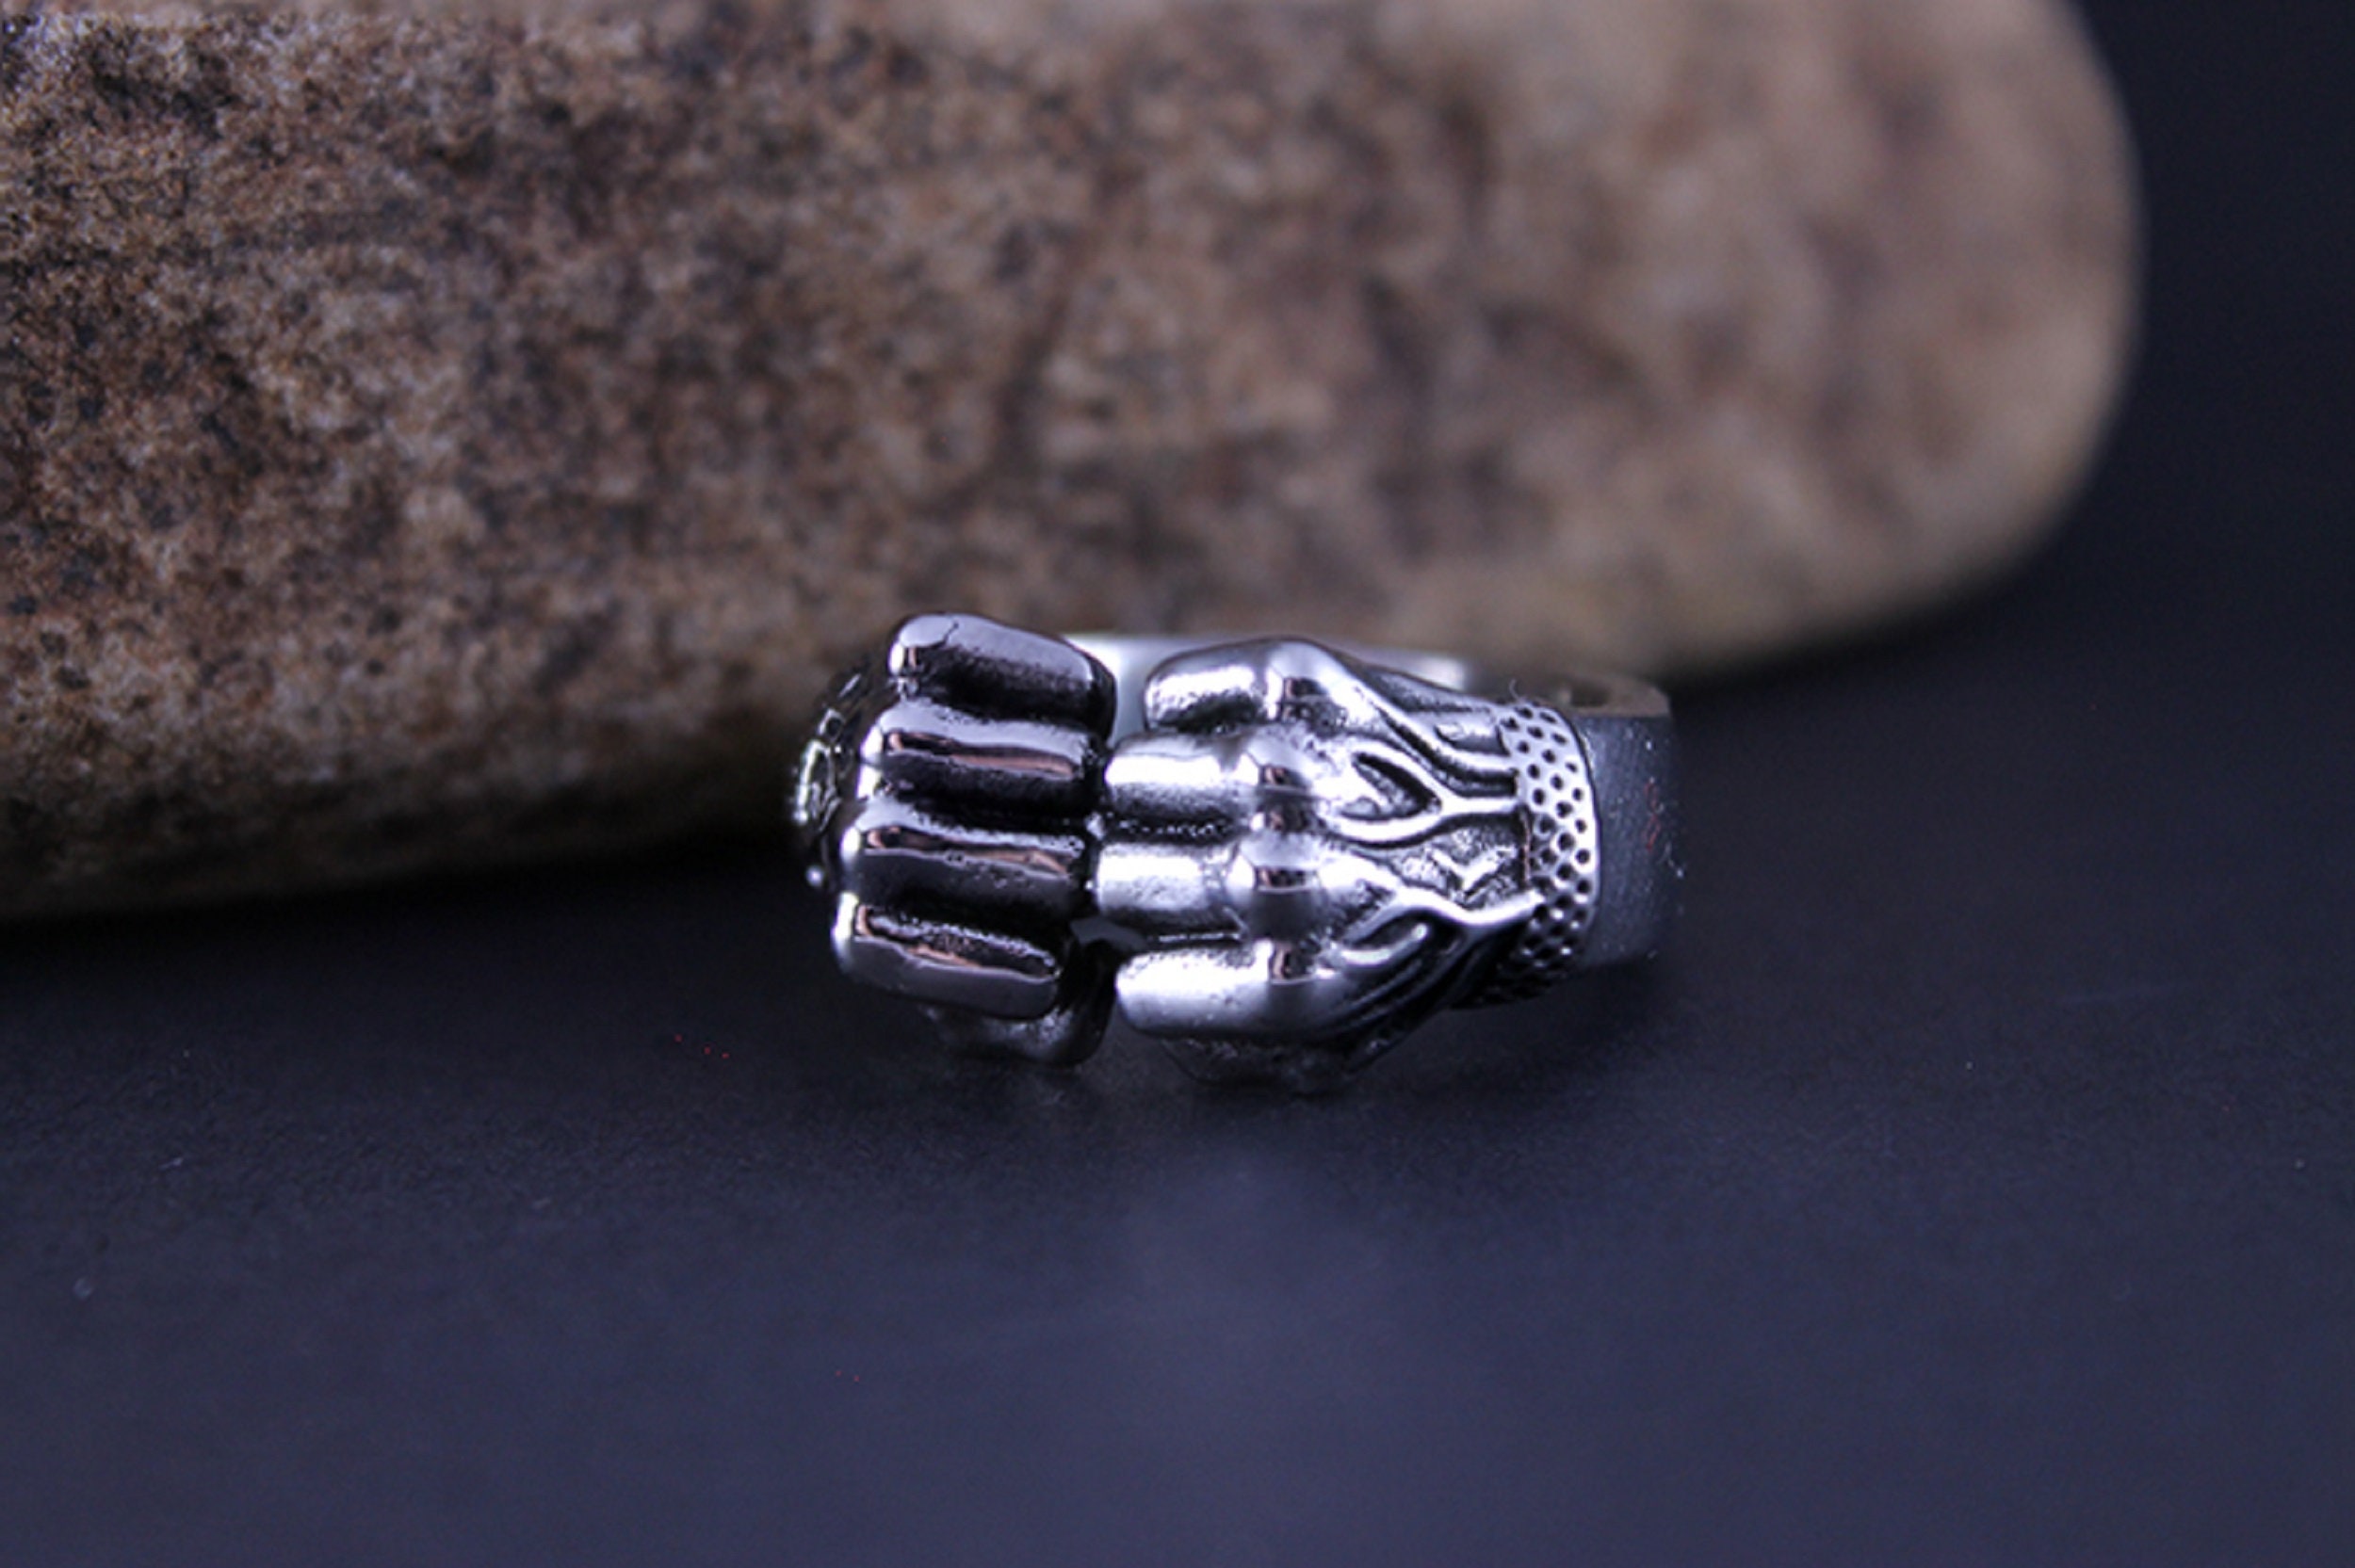 Rings Men, Silver Rings, Adjustable Rings, Mens Jewelry, Rings for Men,  Gift for Him, Made in Greece. 